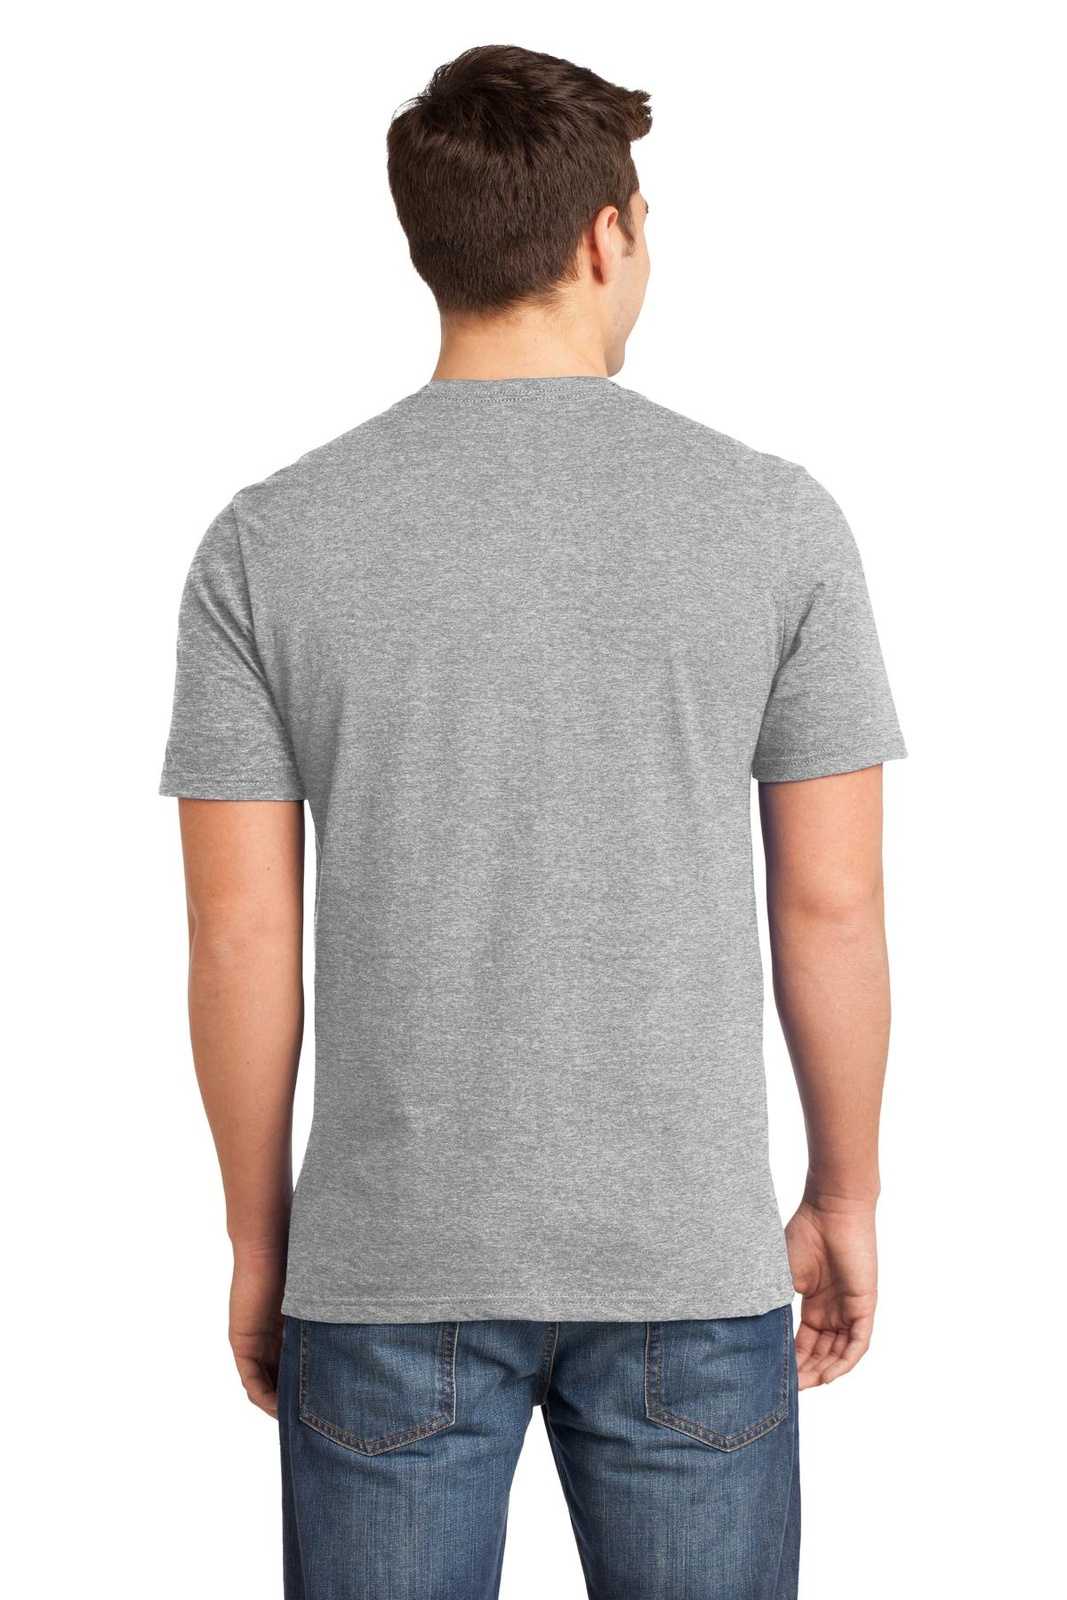 District DT6000 Very Important Tee - Light Heather Gray - HIT a Double - 2